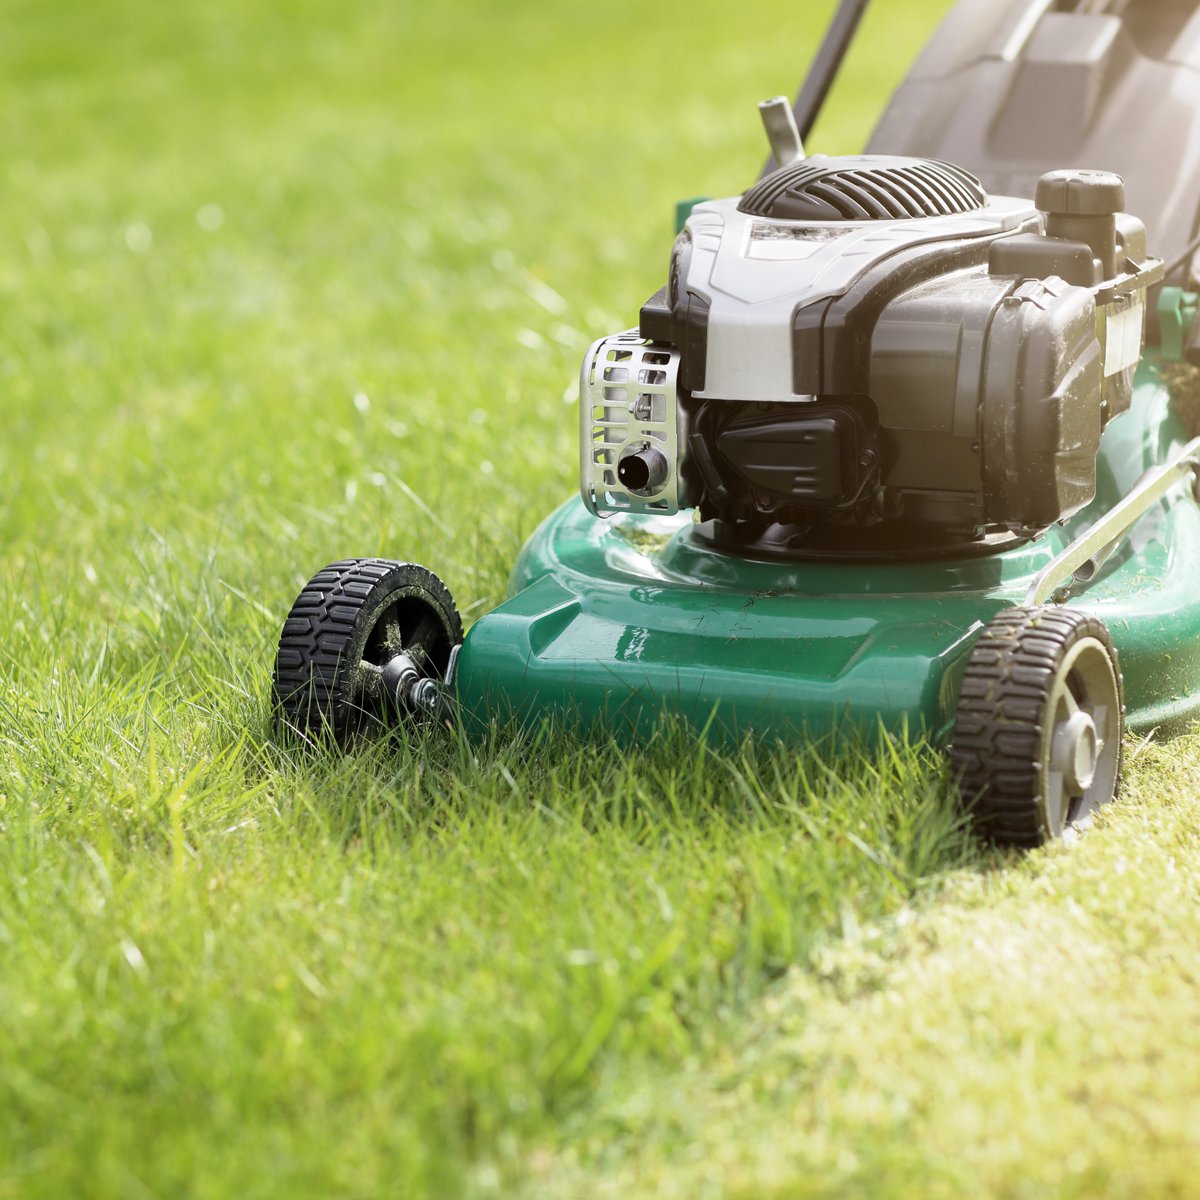 Help #ReducePollution and have a beautiful lawn in the process! #MaricopaCounty residents can receive up to $200 in vouchers towards purchasing a new electric or battery-powered lawn mower and/or lawn device! Visit https://t.co/m4ZJRuOTHe to learn more and sign up. https://t.co/xp3rTeTKOU